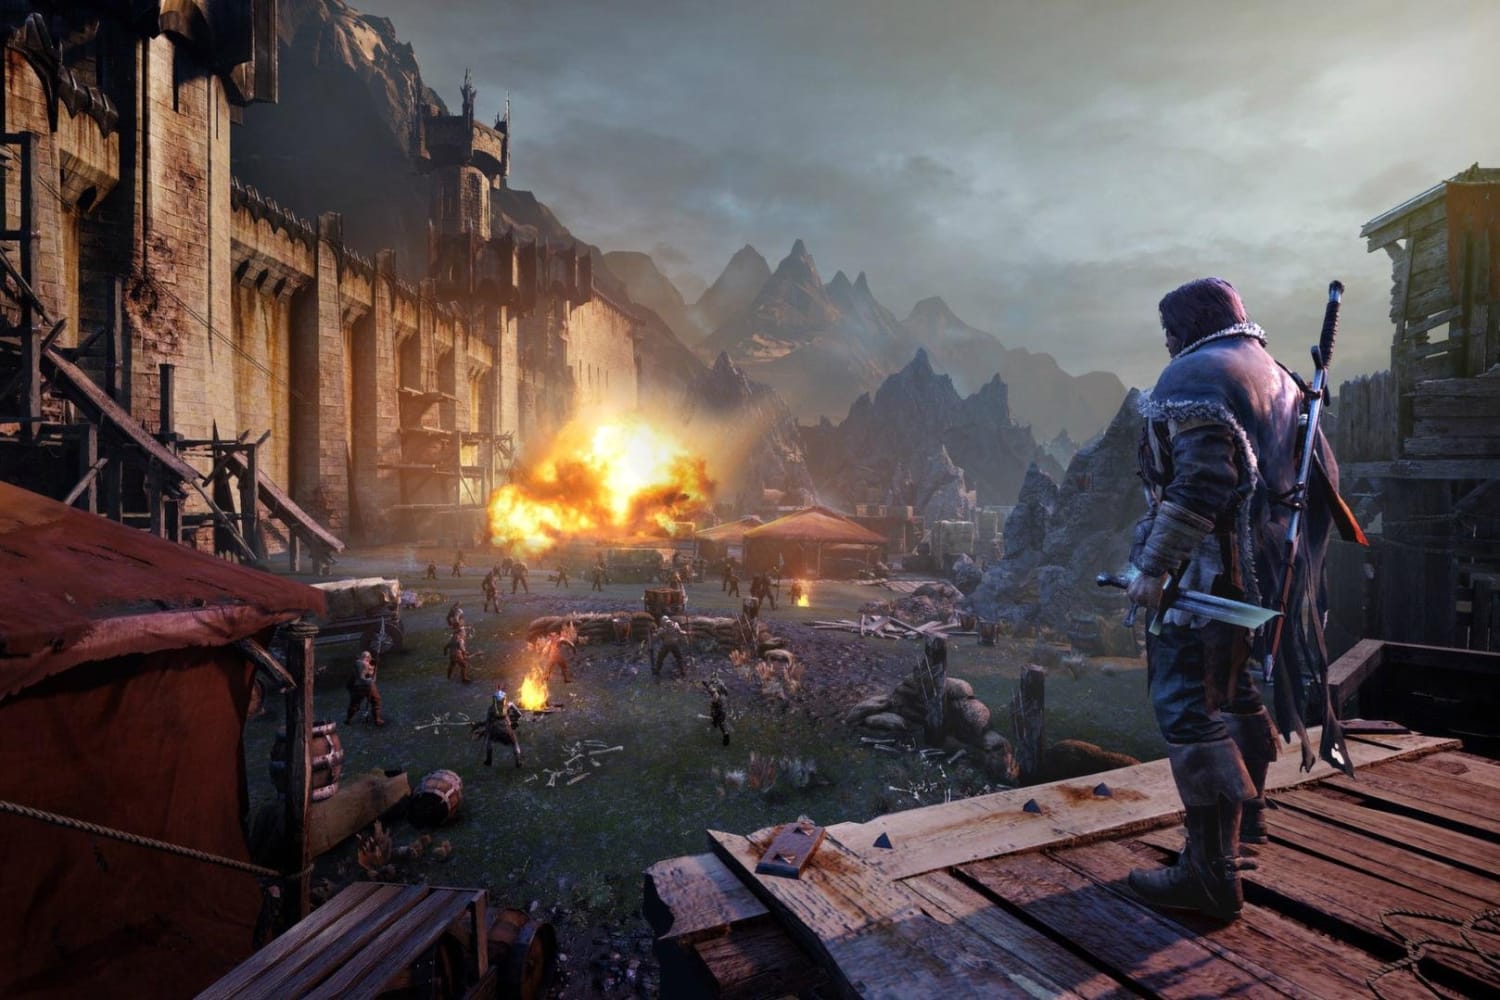 Brand-new trailer for Middle-earth: Shadow of Mordor showcasing the wraith  power and abilities.